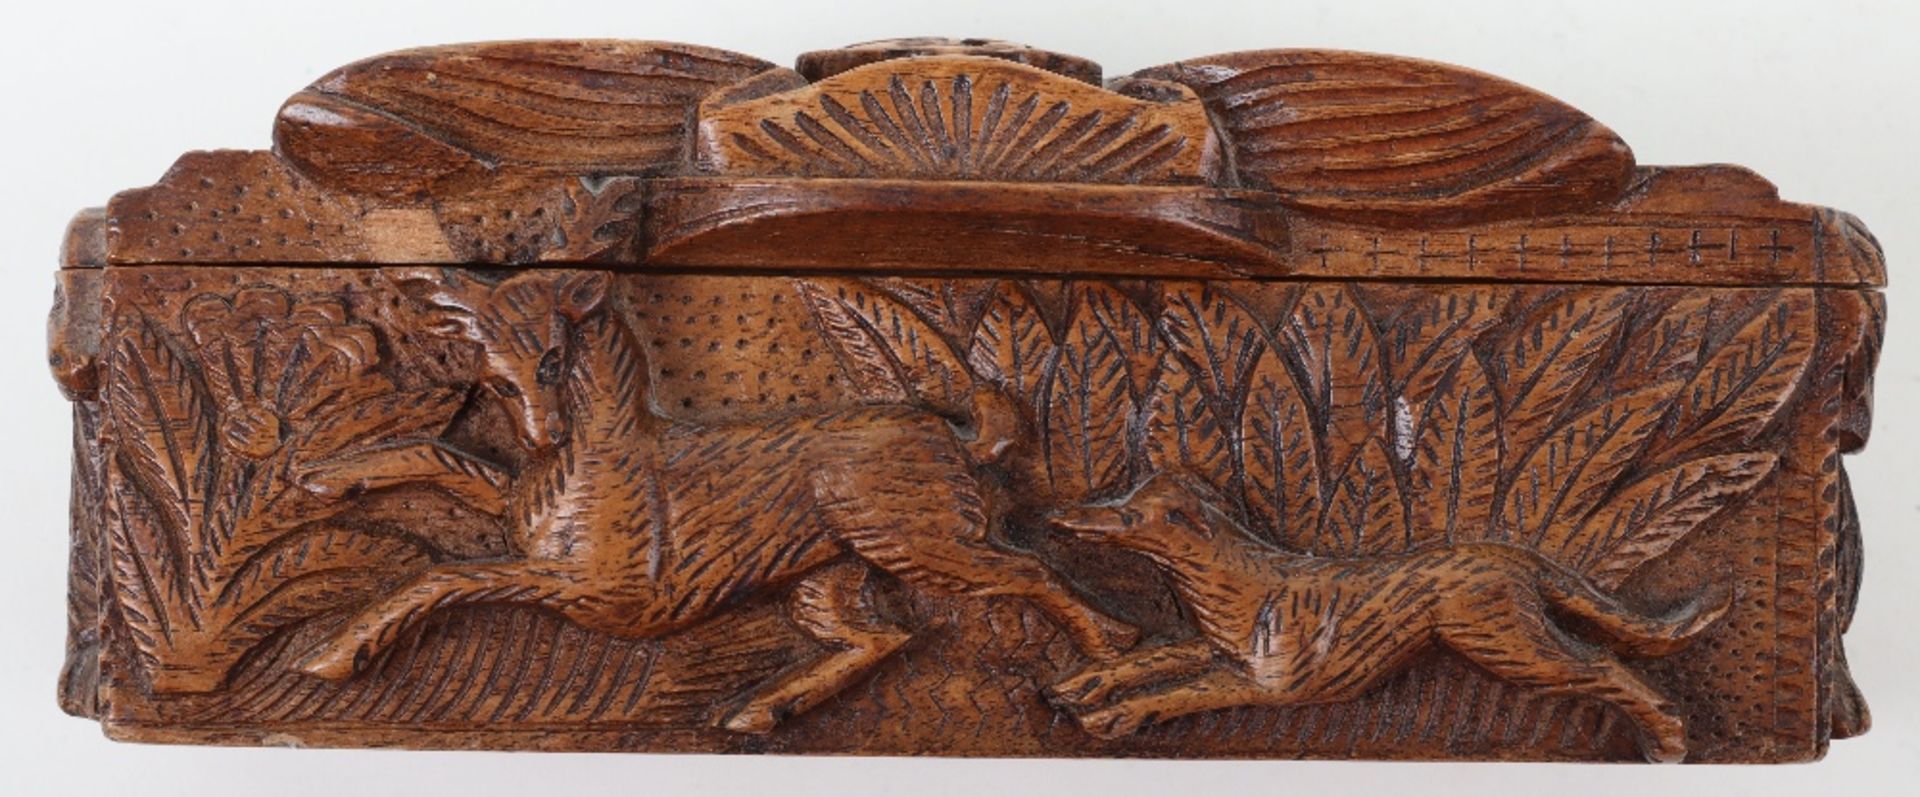 A 19th century Scottish carved wood box with Campbell clan crest and motto to lid - Image 3 of 8